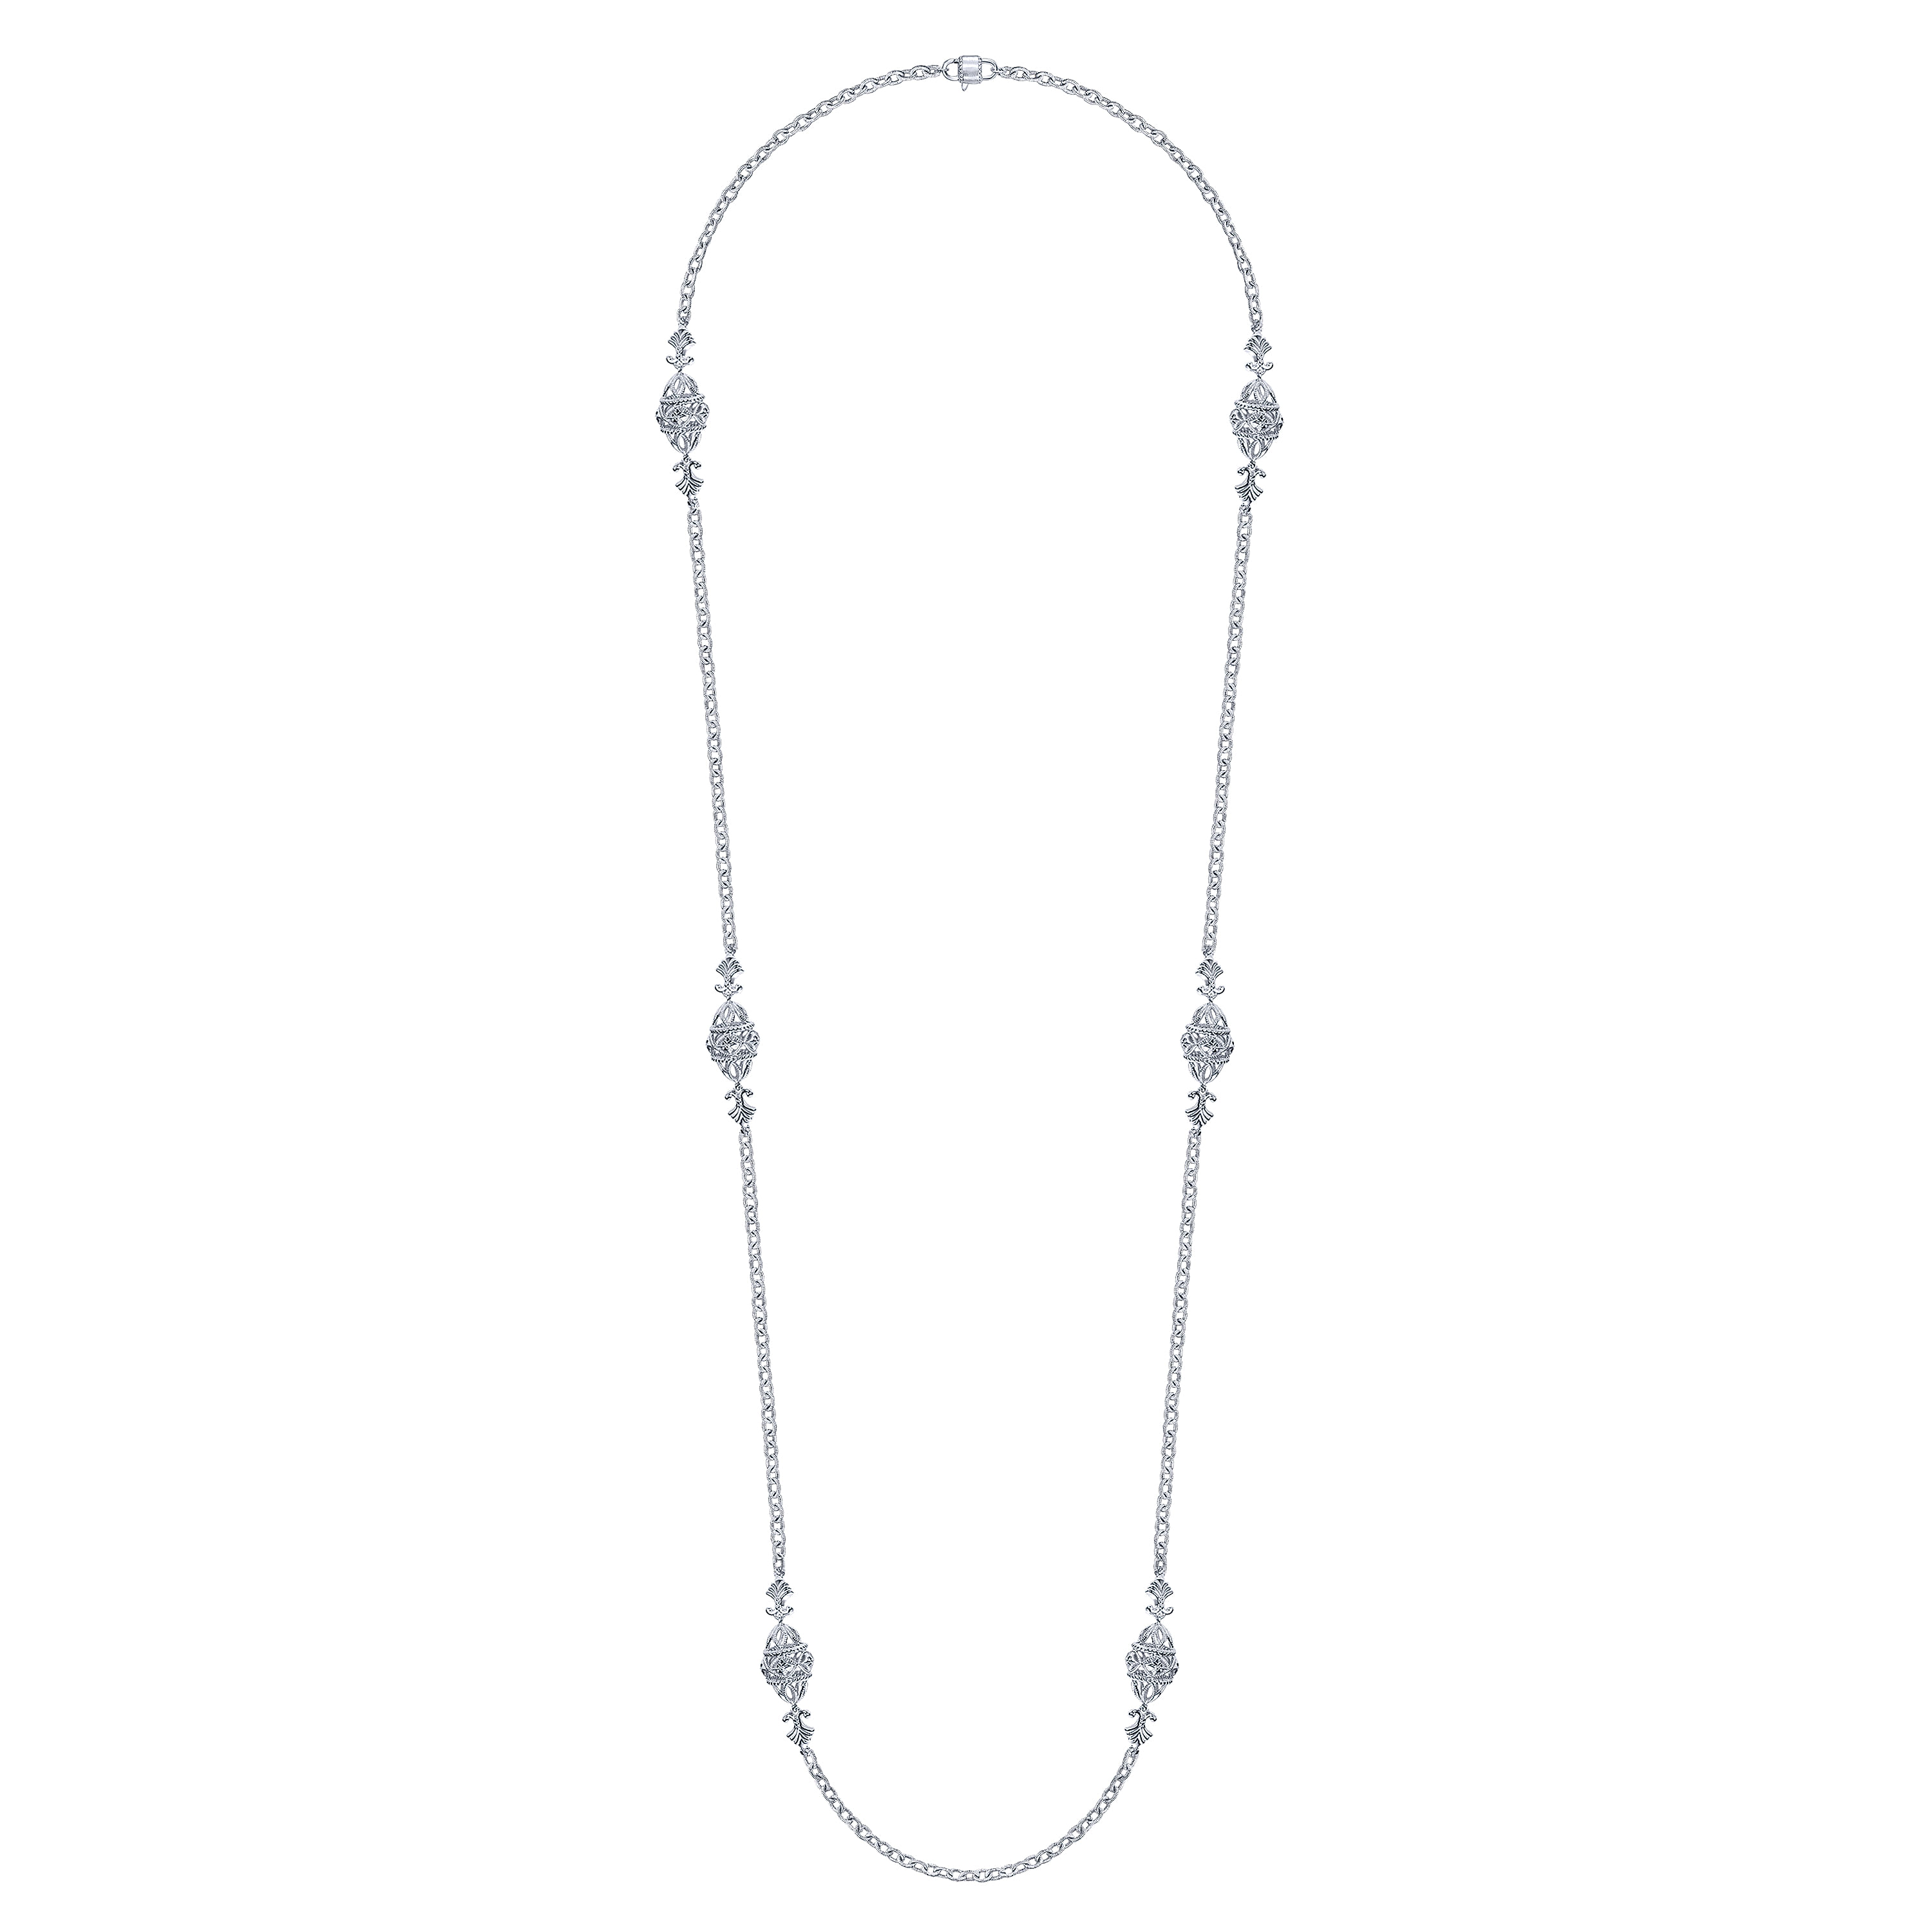 32 inch 925 Sterling Silver Filigree Bead Station Necklace